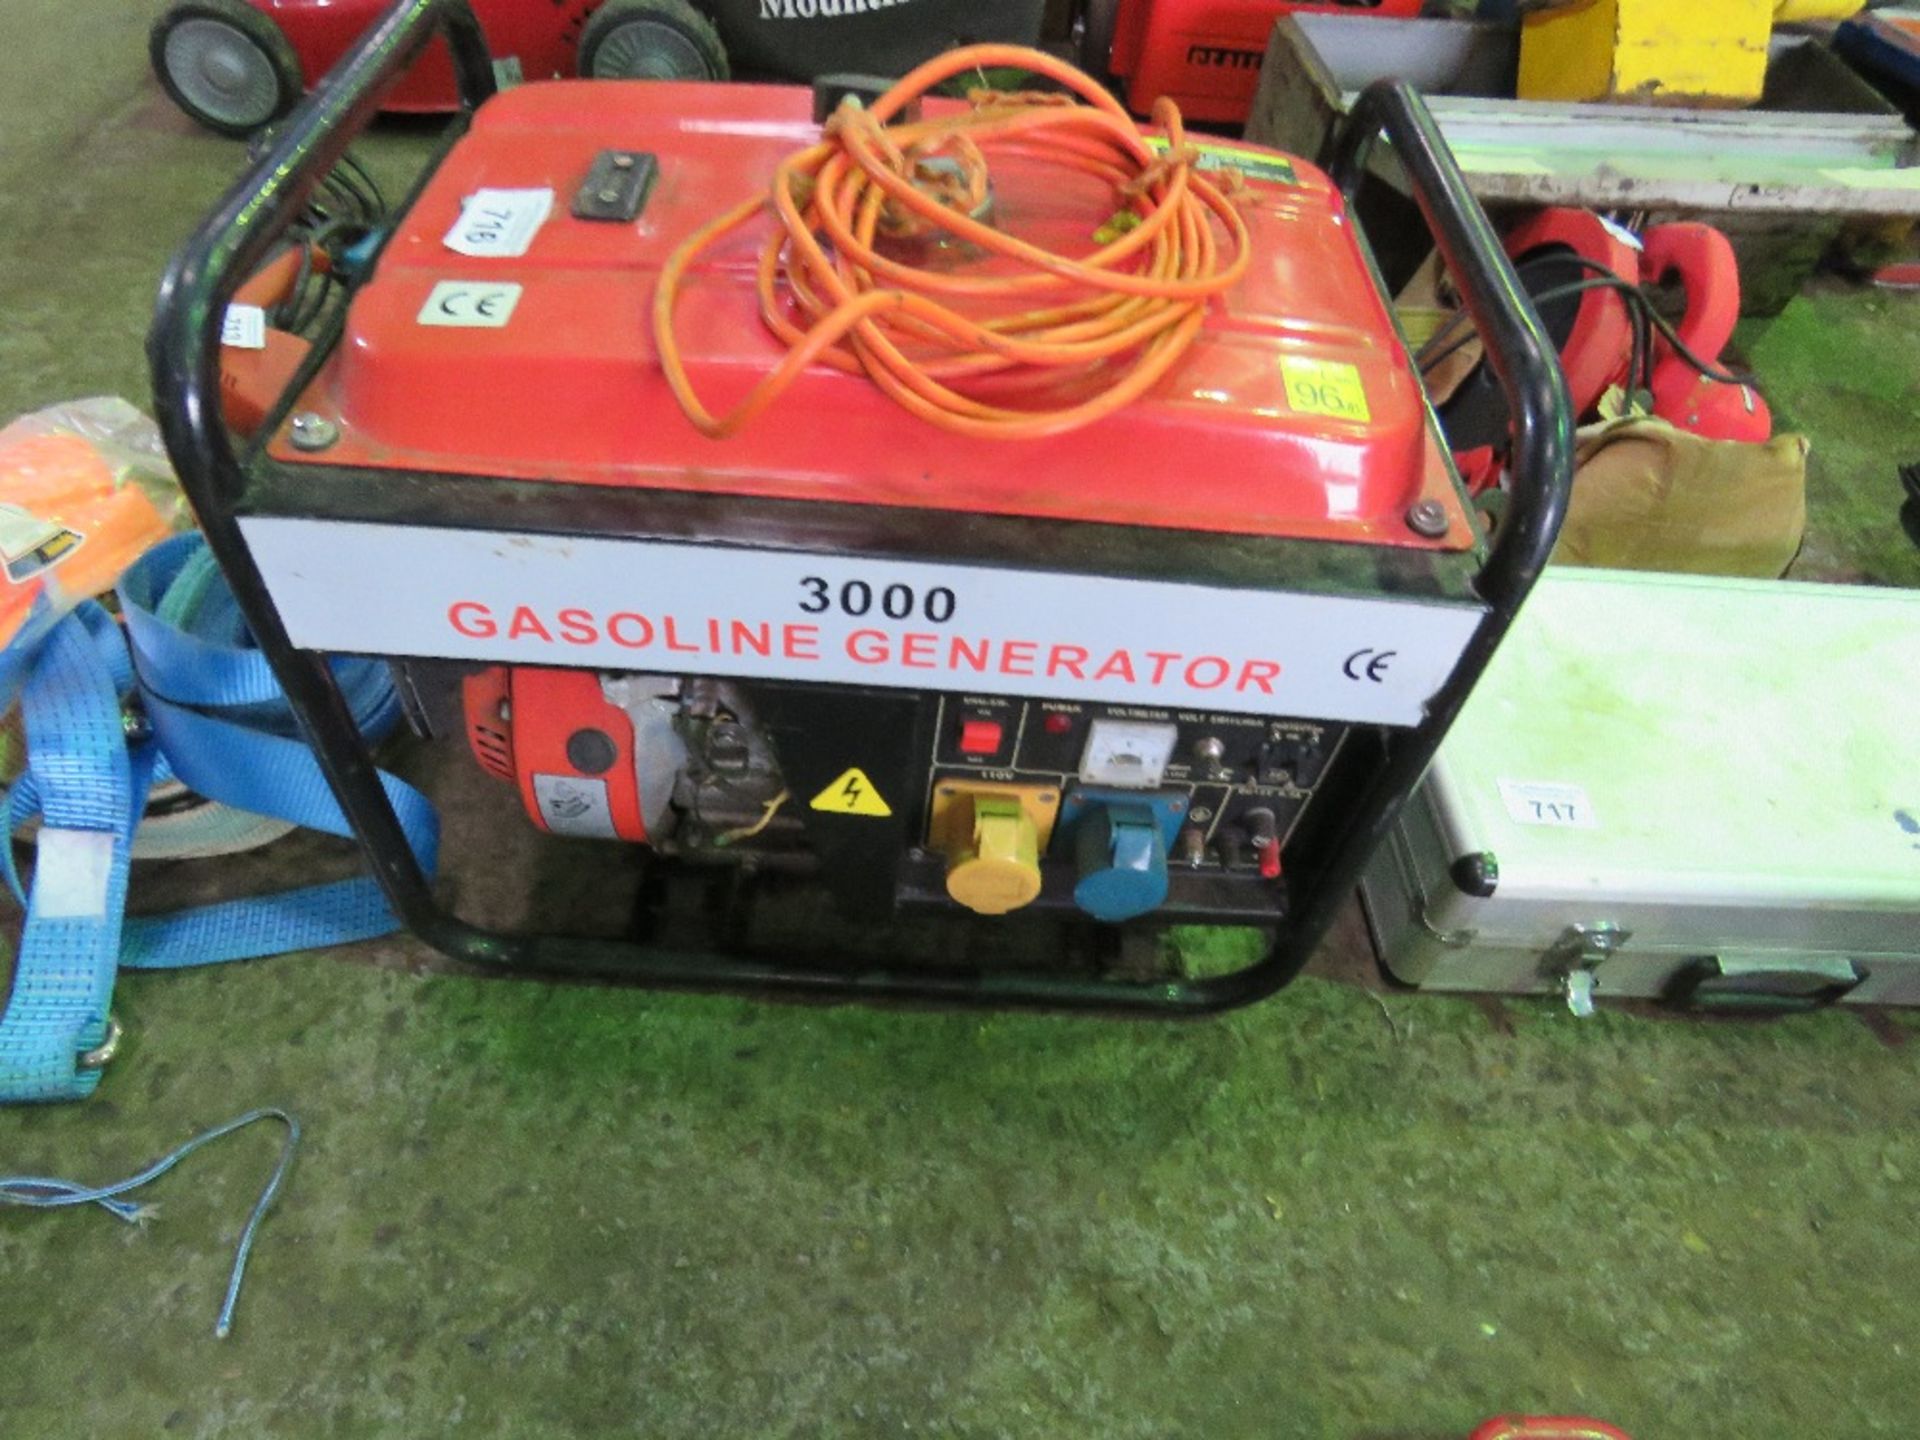 3000 PETROL GENERATOR PLUS A LEAD. RETIREMENT SALE. SOLD UNDER THE AUCTIONEERS MARGIN SCHEME THEREFO - Image 2 of 2